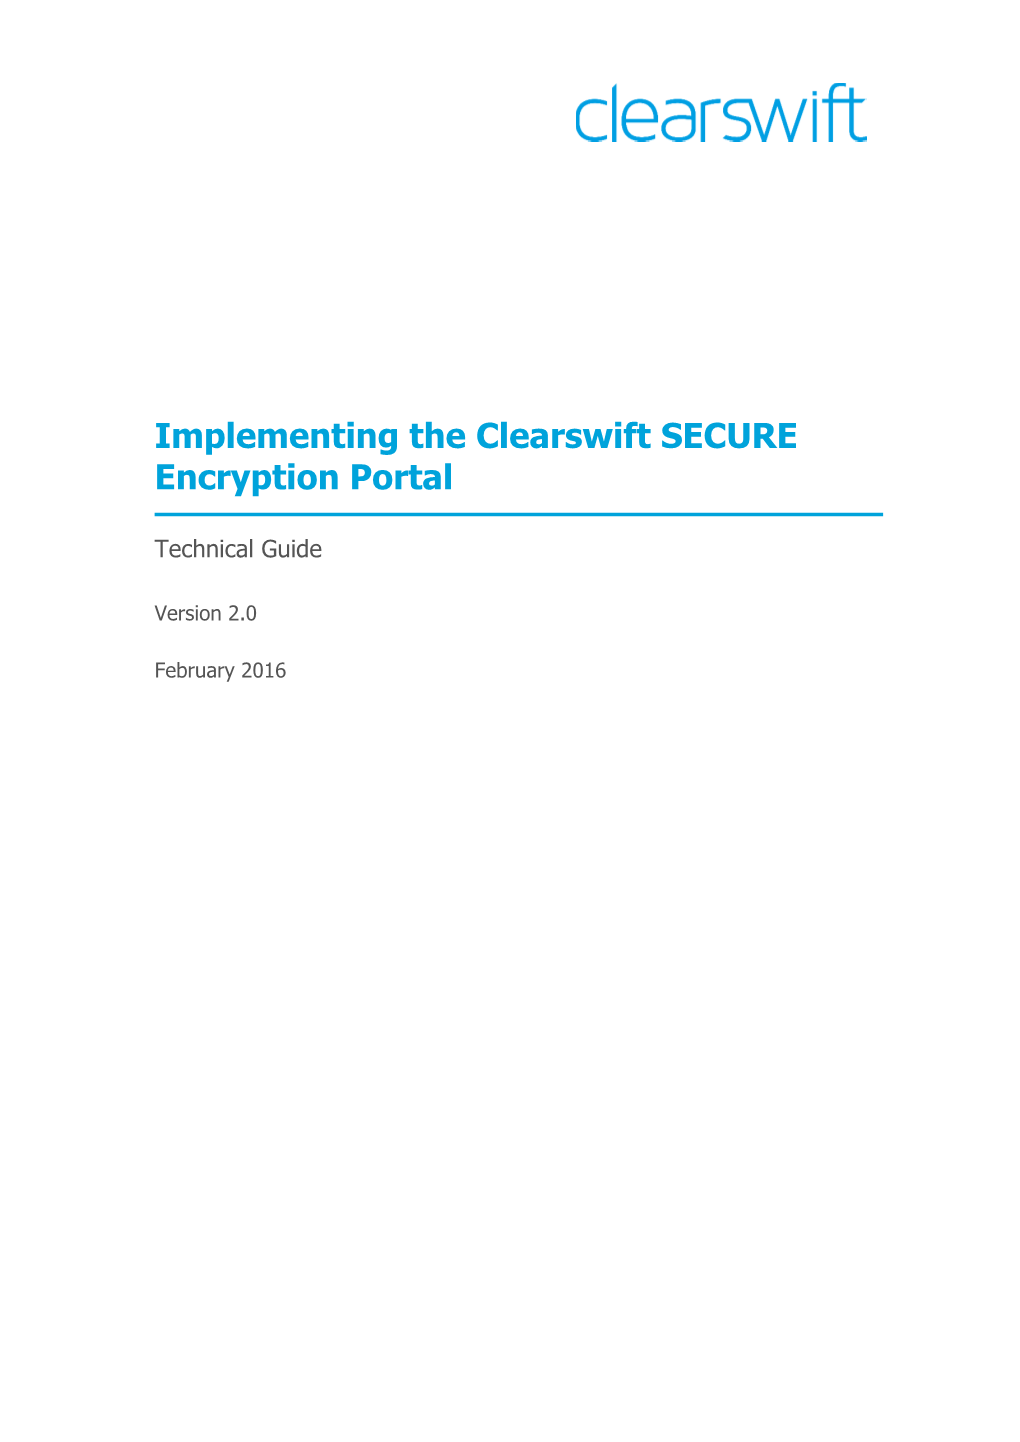 Implementing the Clearswift SECURE Encryption Portal